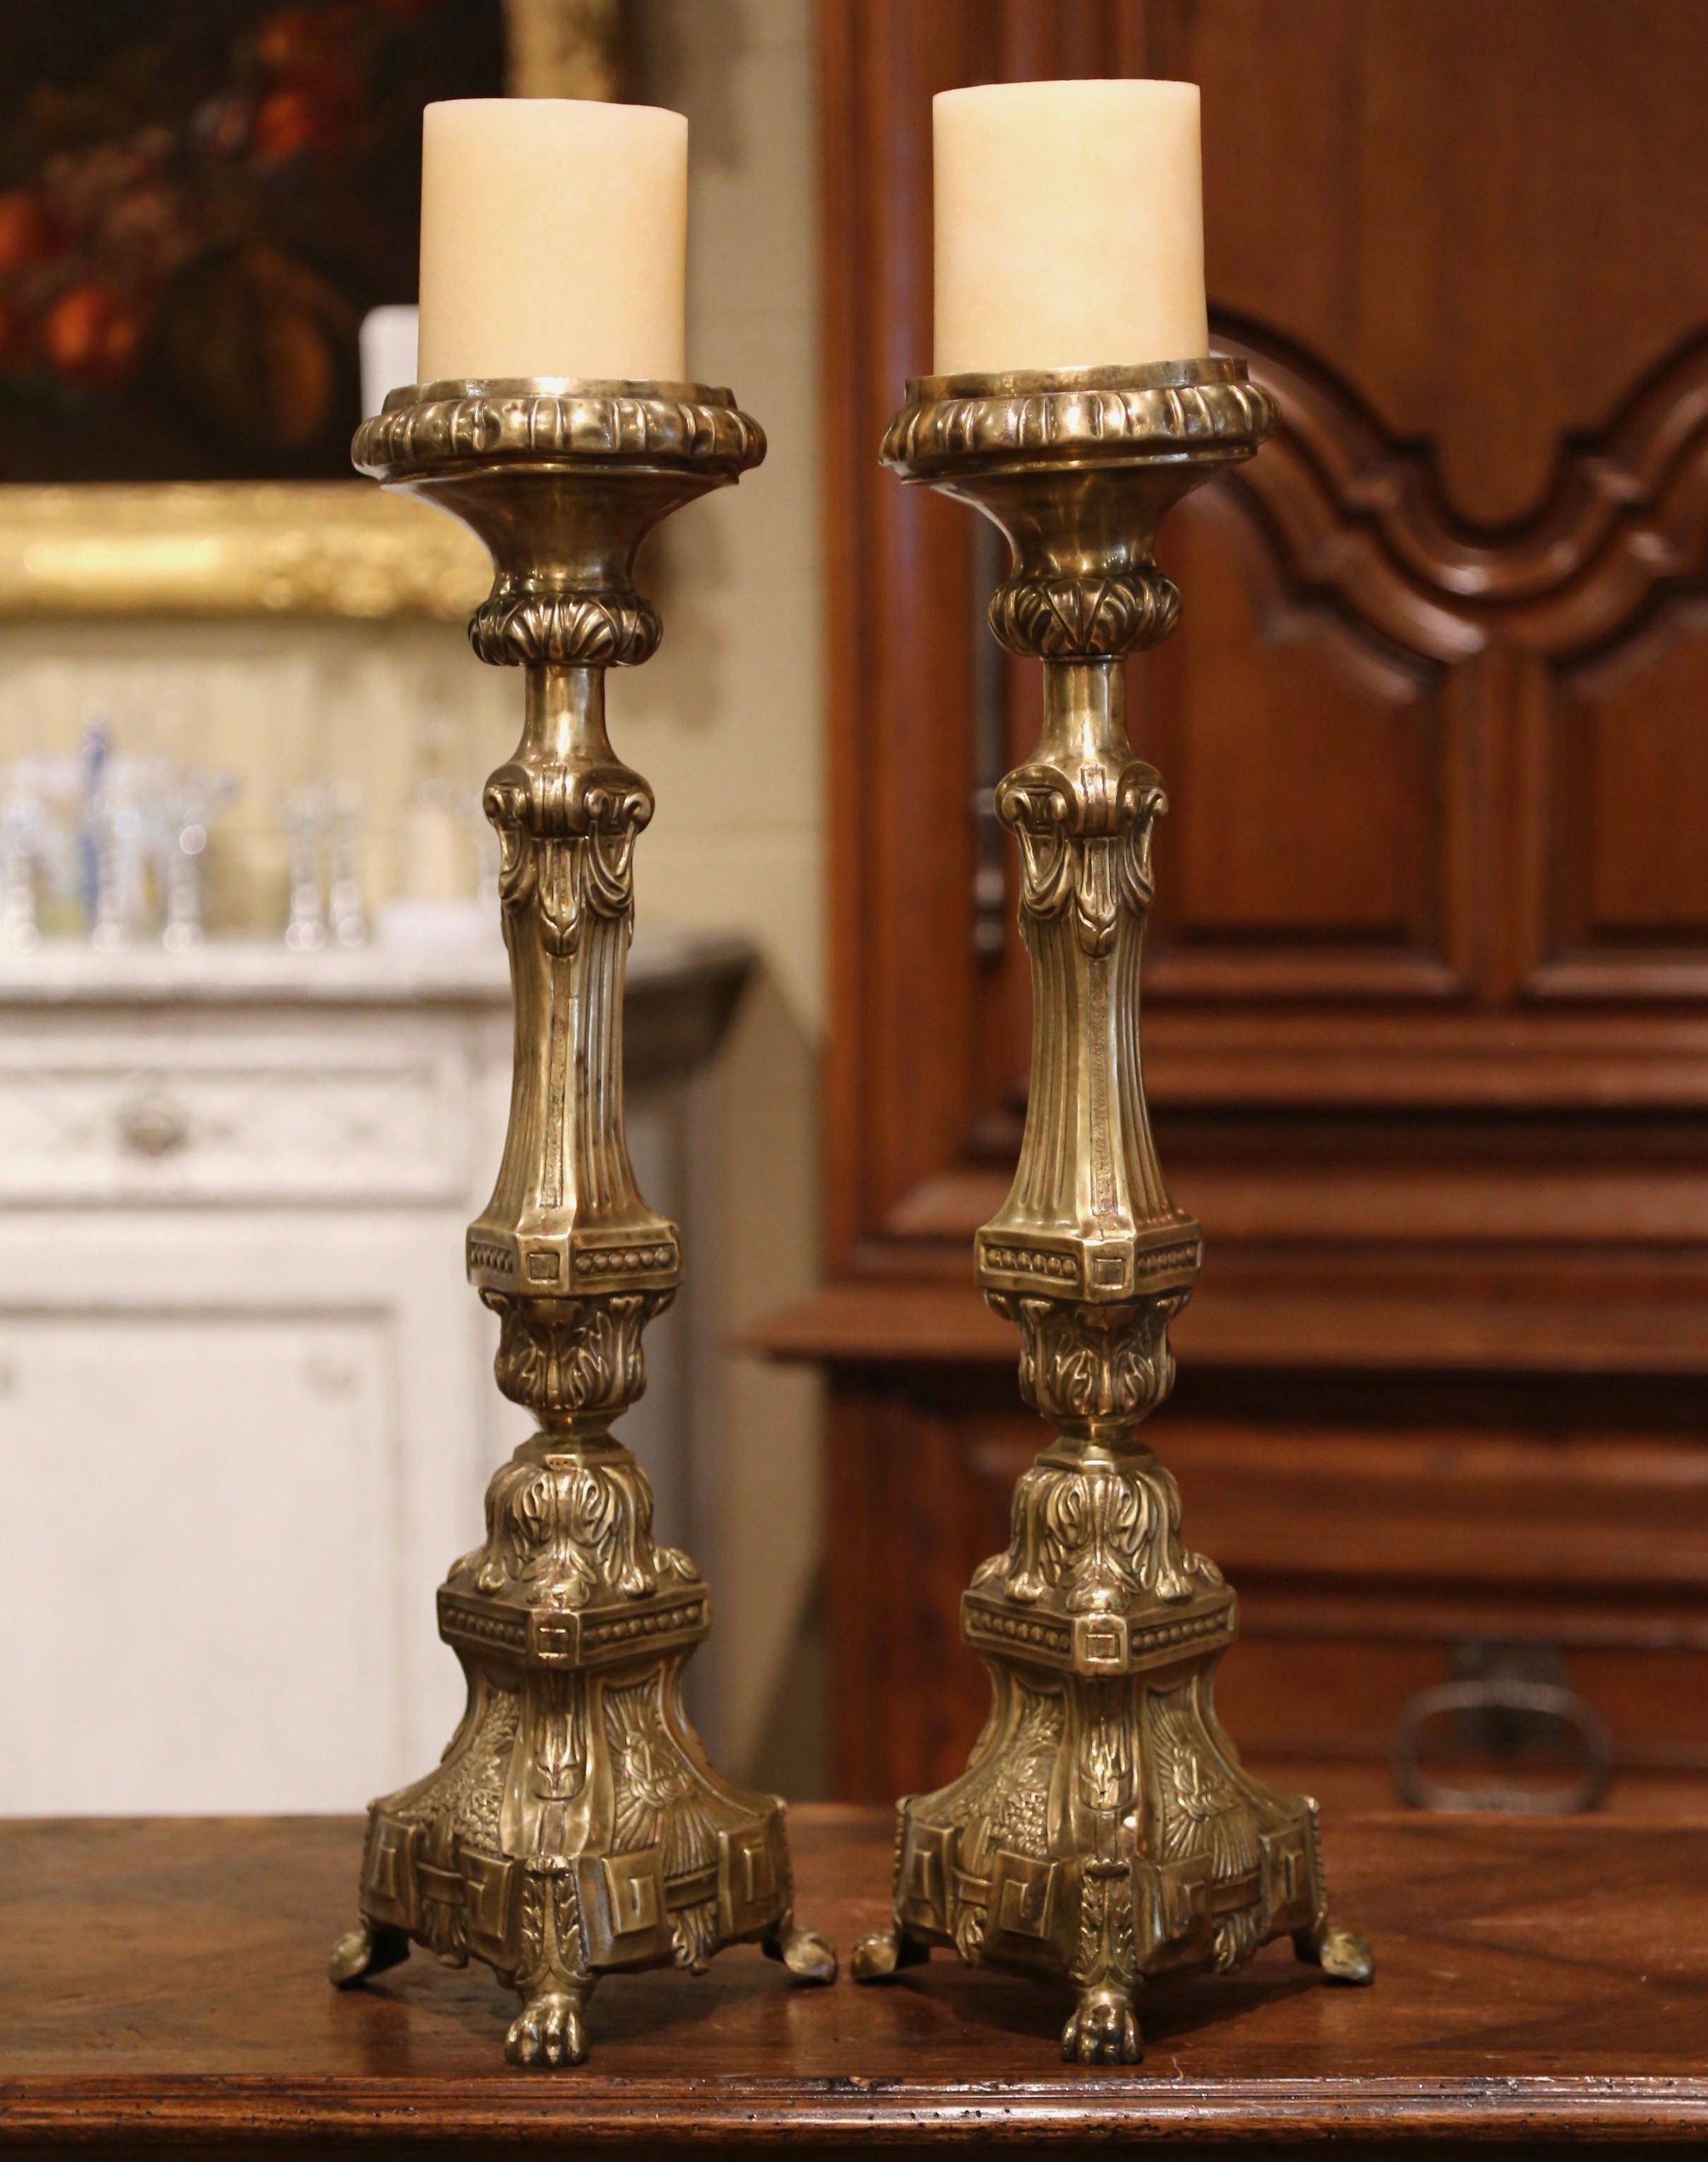 Rococo Pair of 19th Century French Repousse Brass Church Pic-Cierges Candle Holders